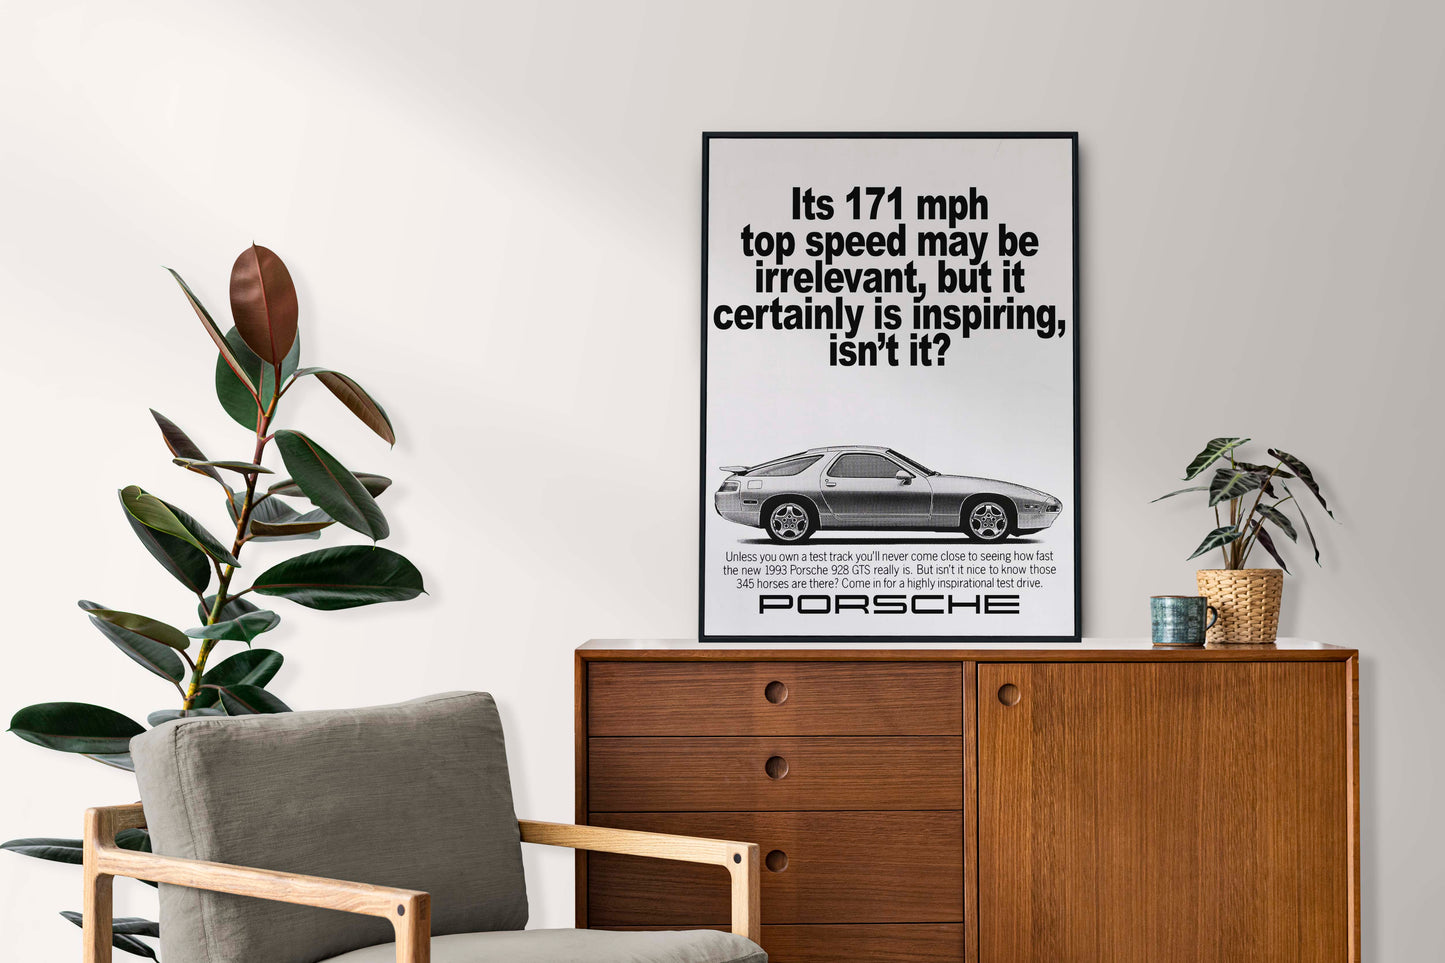 Porsche "Its 171 mph Top Speed May Be Irrelevant" Poster